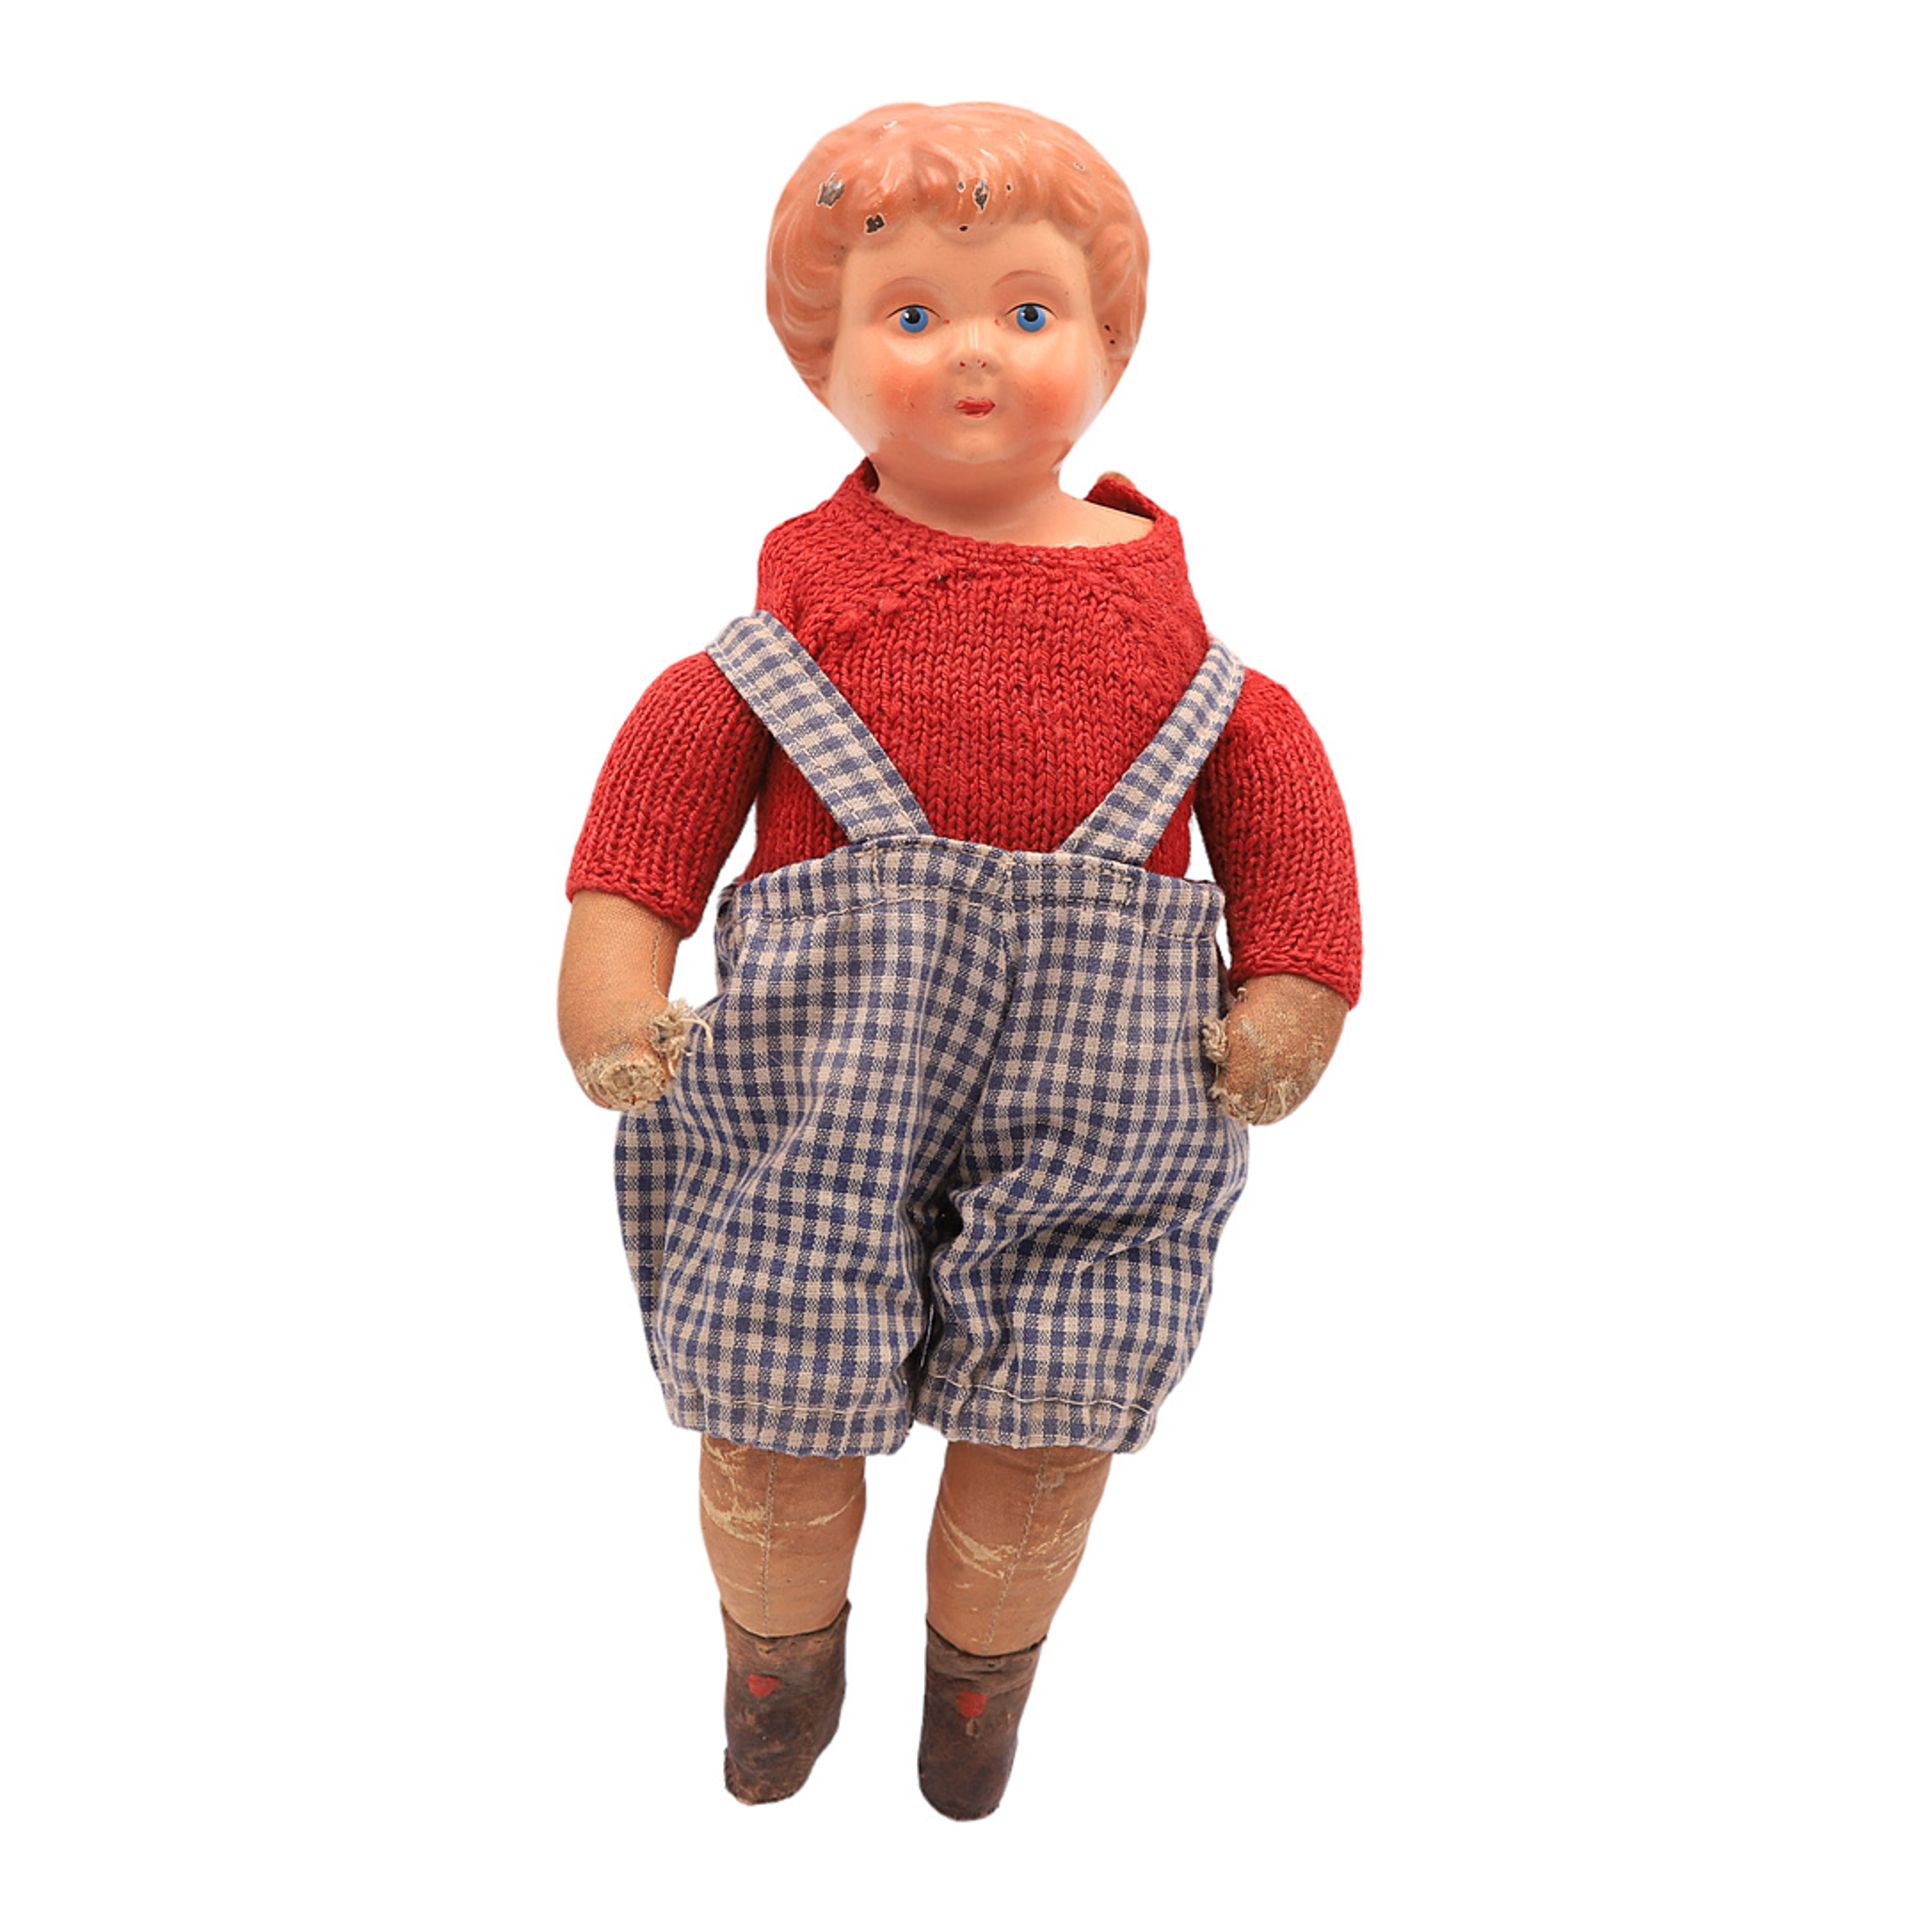 Buschow & Beck / Minerva doll, 1st half of the 20th century